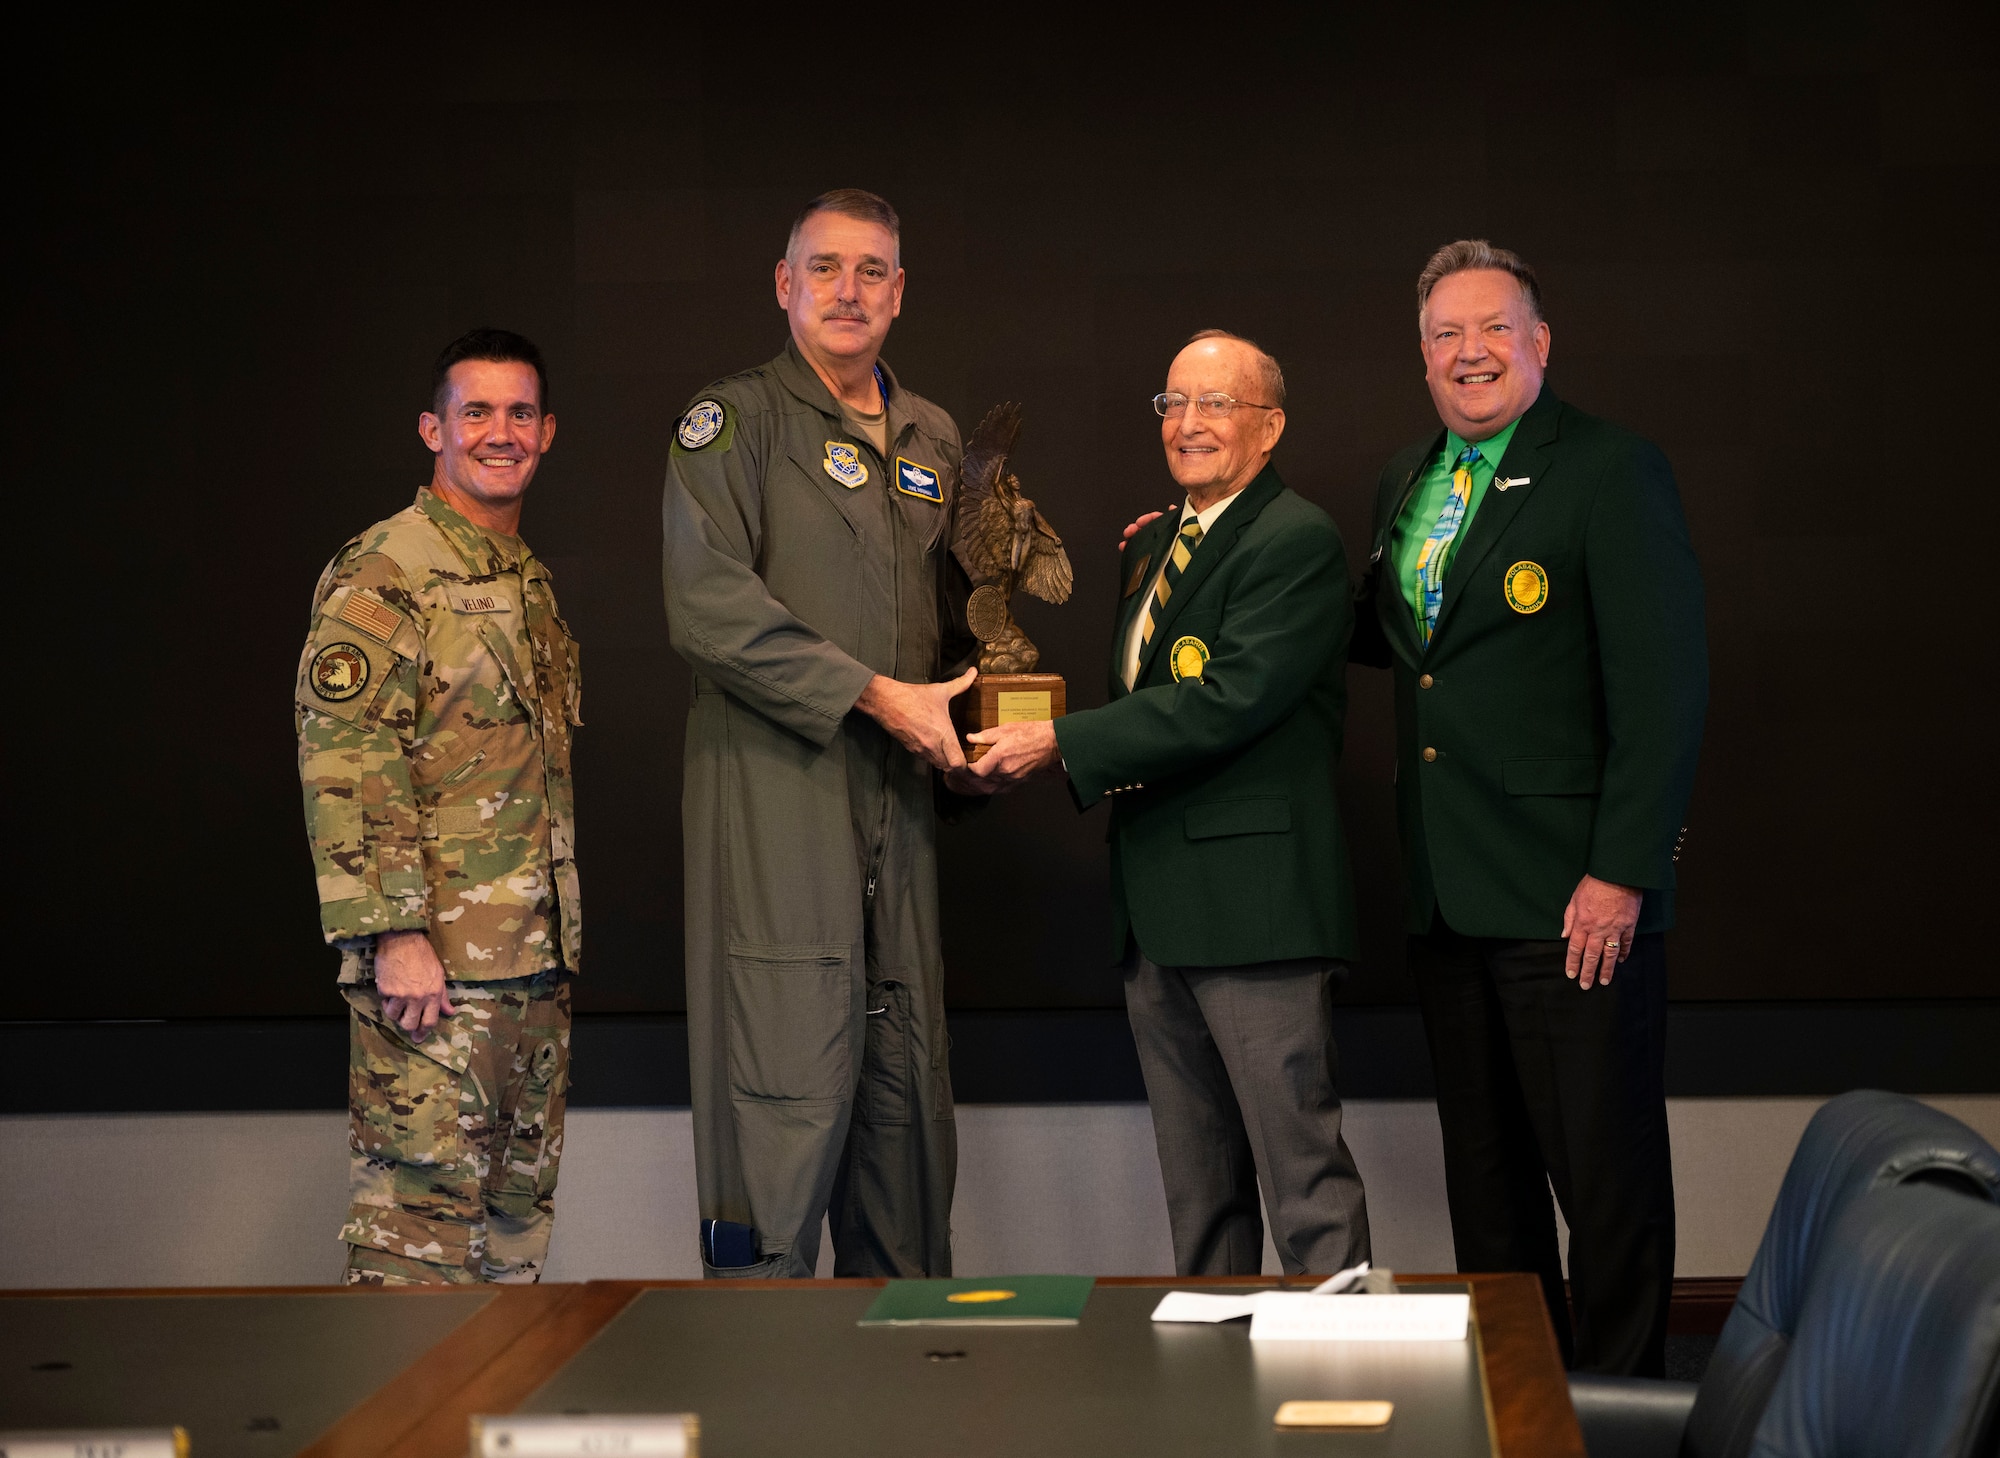 Mr. John “Woody” Almind, right, local Flight Captain for the 26th Gateway Flight Order of Daedalians, and Maj Gen (ret) Jerry Allen, second from right, Chairman of the Daedalian Foundation Board of Trustees, present the 2020 Major General Benjamin D. Foulois Memorial Award to Gen. Mike Minihan, second from left, Air Mobility Command commander, and Col. Charles Velino, left, AMC Directory of Safety, at Scott Air Force Base, Illinois, Nov. 16, 2021.